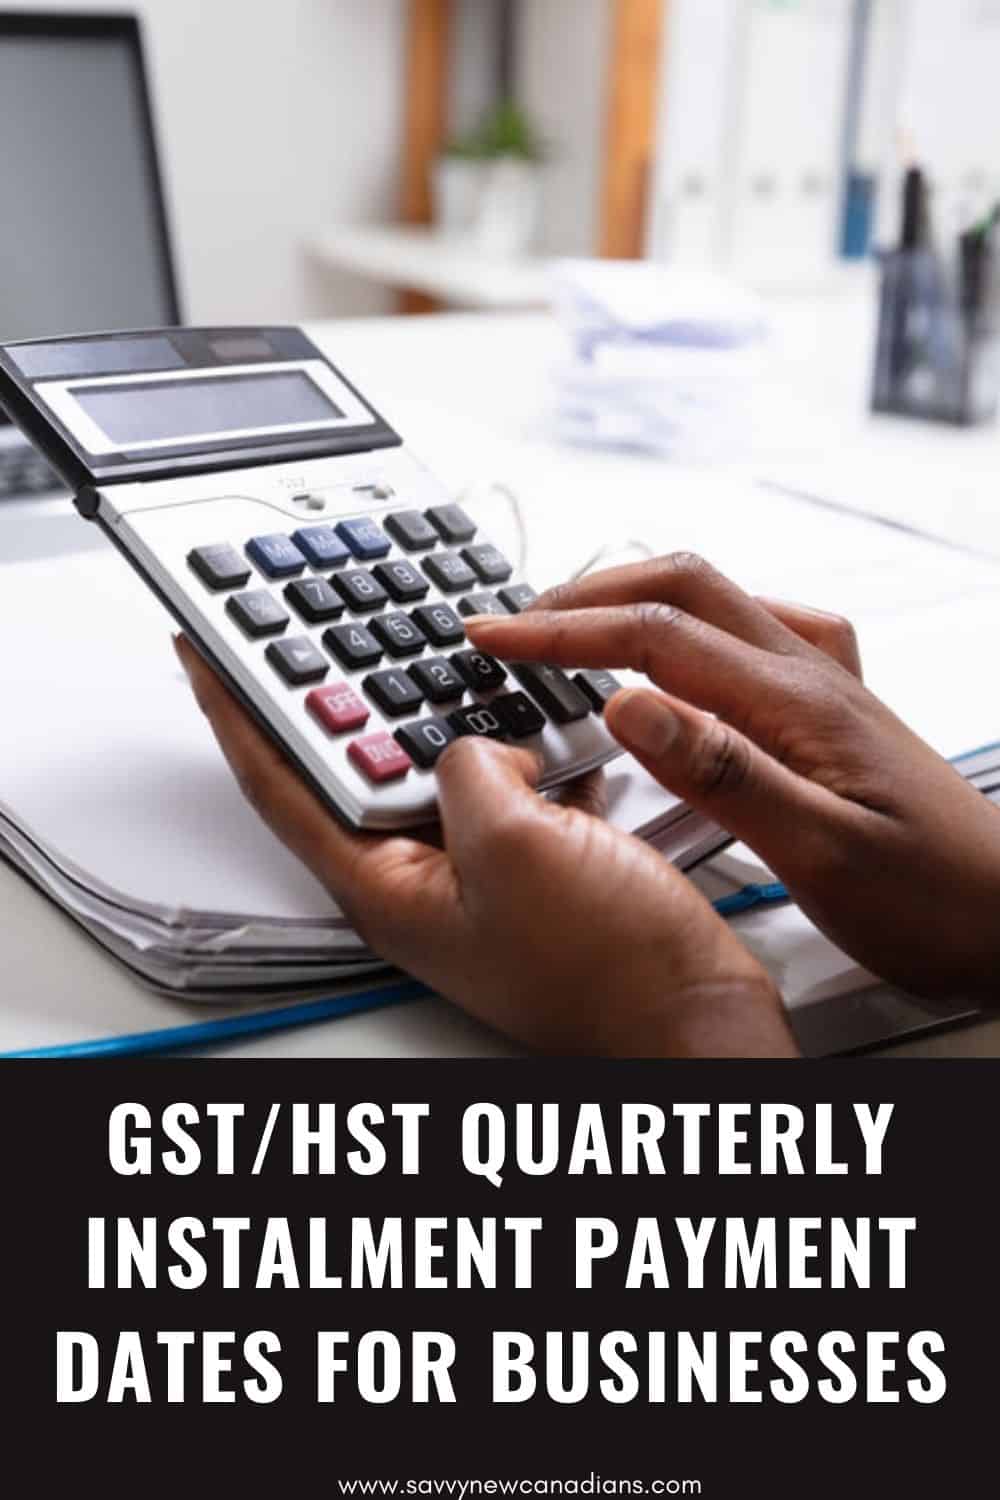 GST/HST Quarterly Instalment Payment Dates for Businesses in 2022